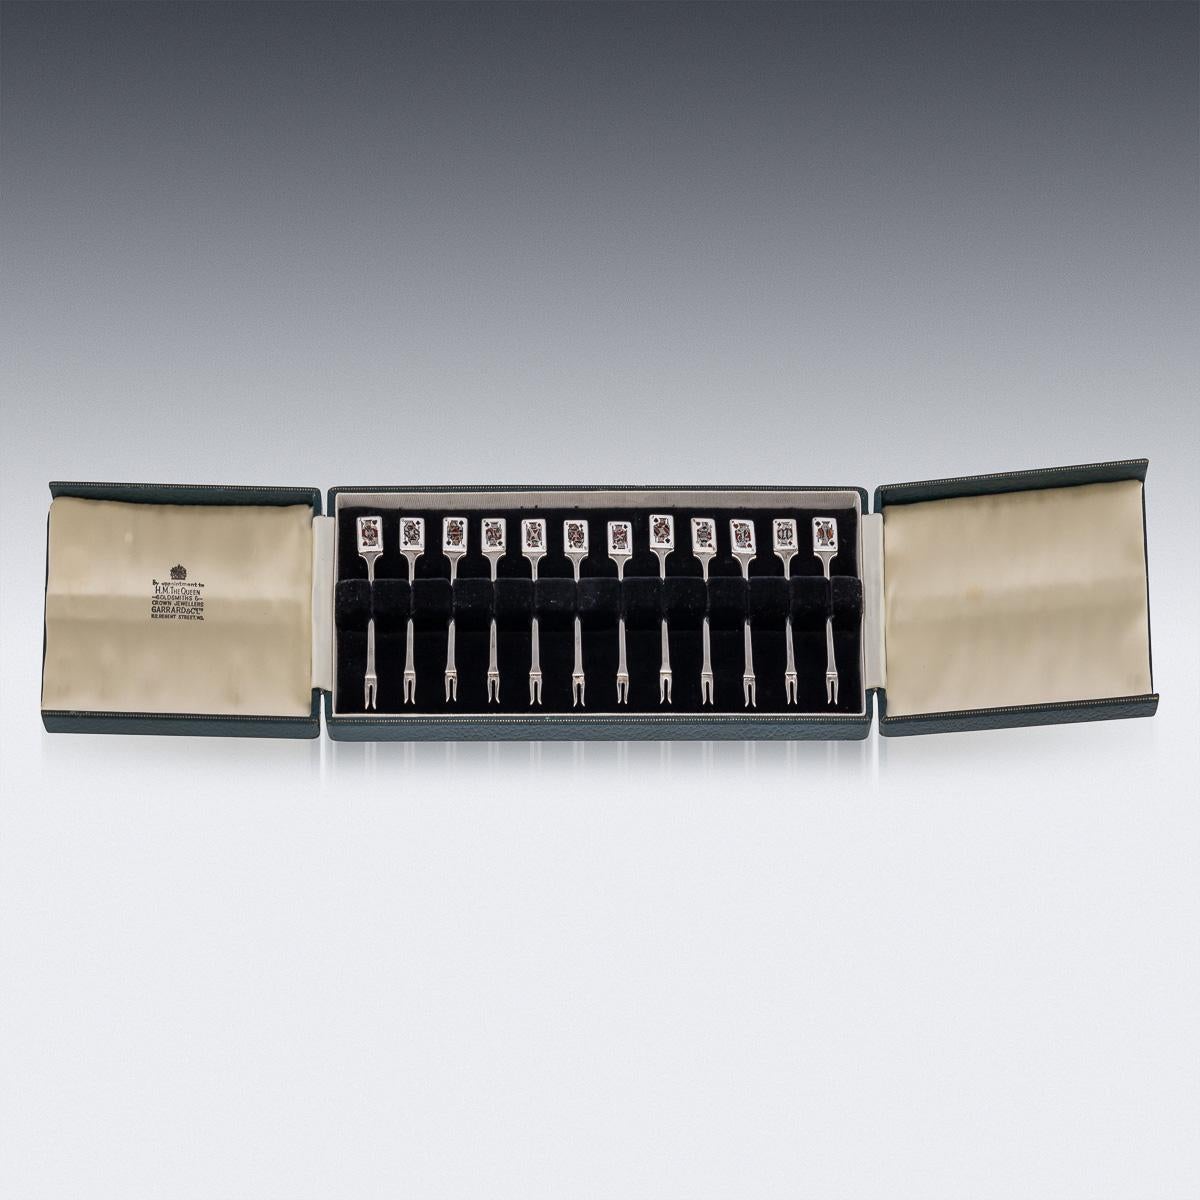 20th Century British solid silver set of twelve cocktail picks, decorated with enamels depicting playing cards. The set comes in its original leatherette and velvet lined box. Each piece is Hallmarked English silver (925 Standard), Birmingham, year